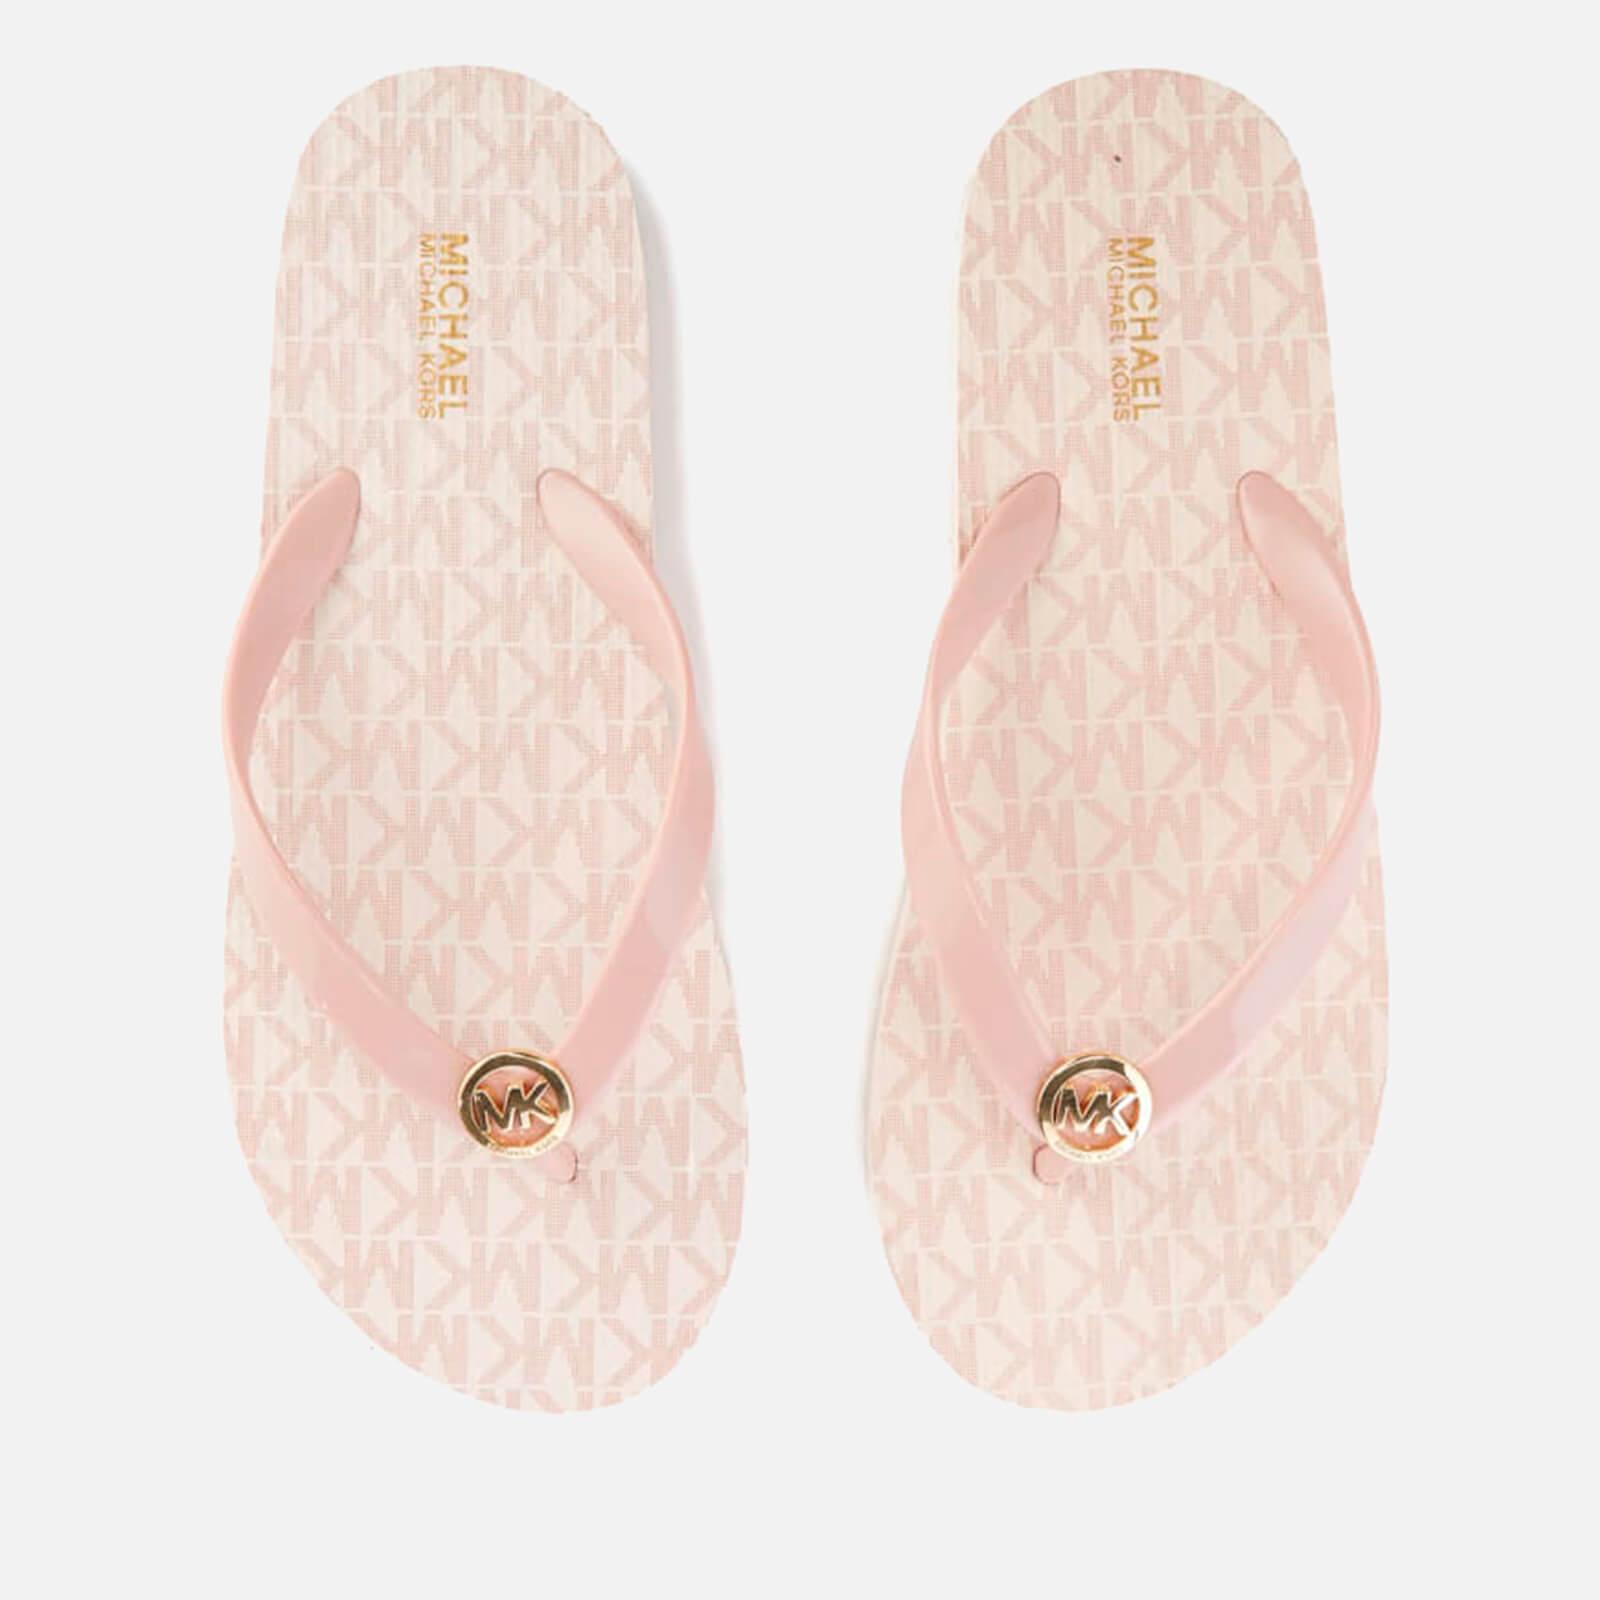 Michael Kors Slippers Pink Sale Online, SAVE 46% - aveclumiere.com